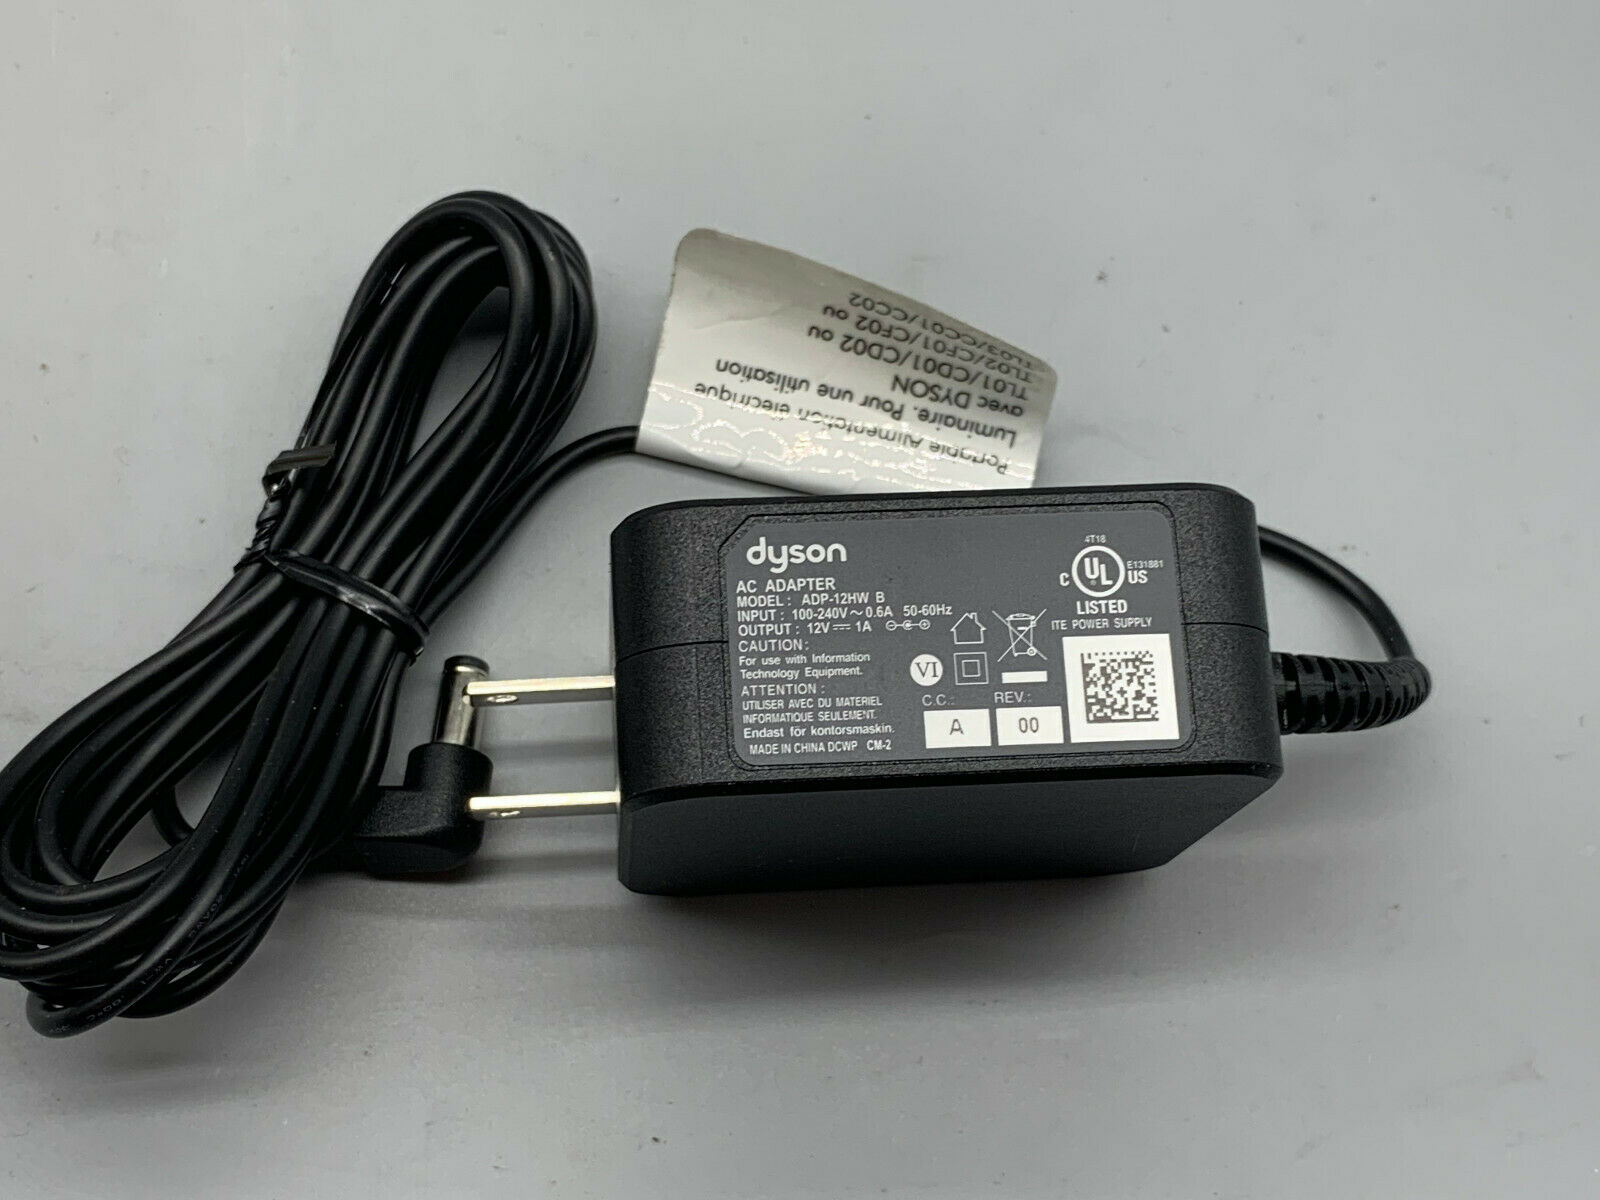 New 12V 1A Dyson AC Adapter Power Supply ADP-12HW B FOR PORTABLE LUMINAIRE